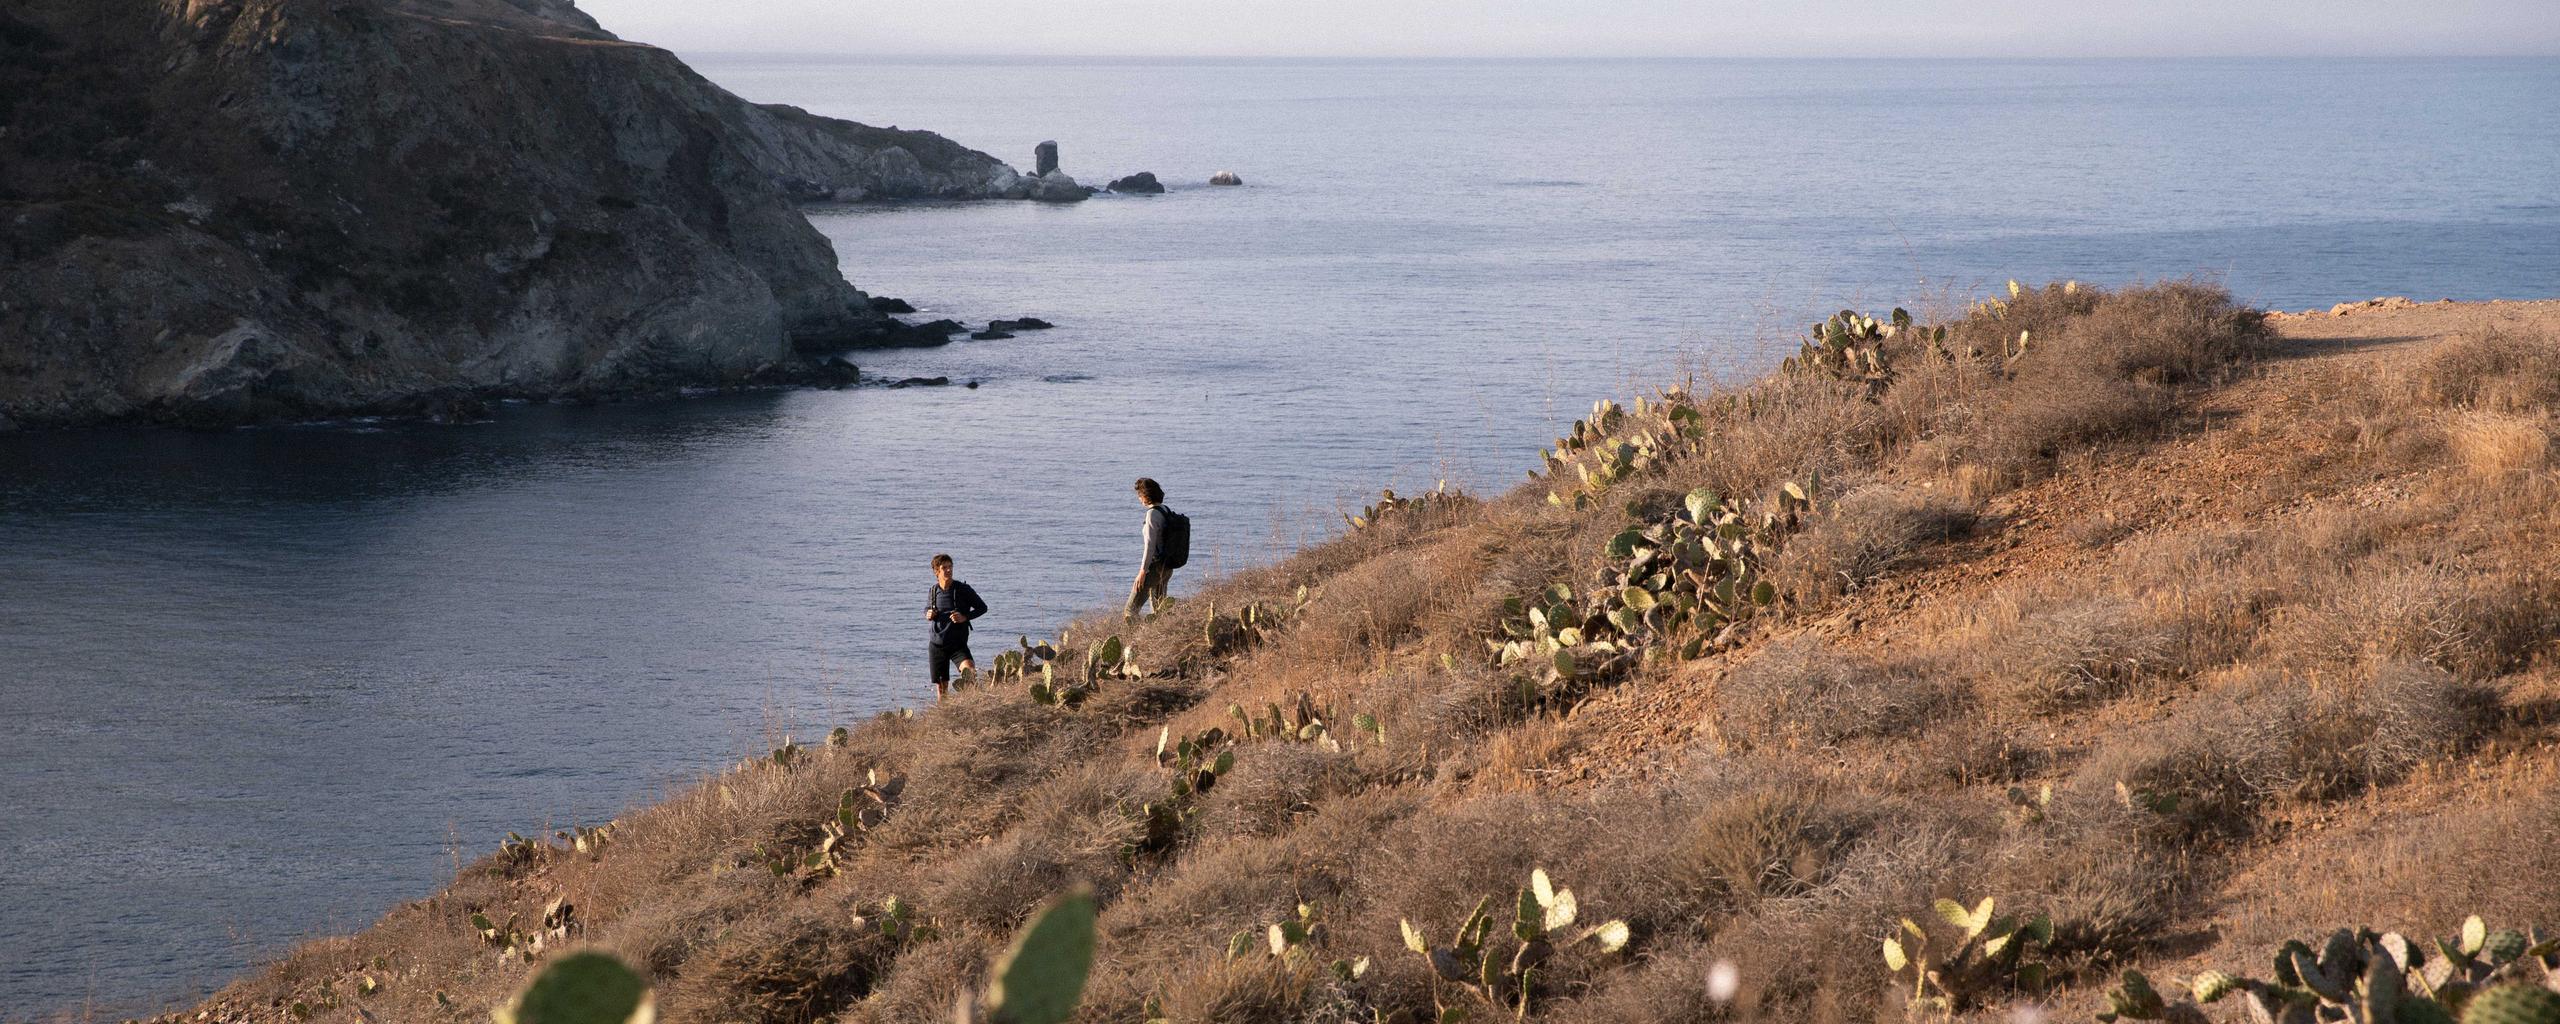 Man and woman hiking down seaside hill off Catalina Island